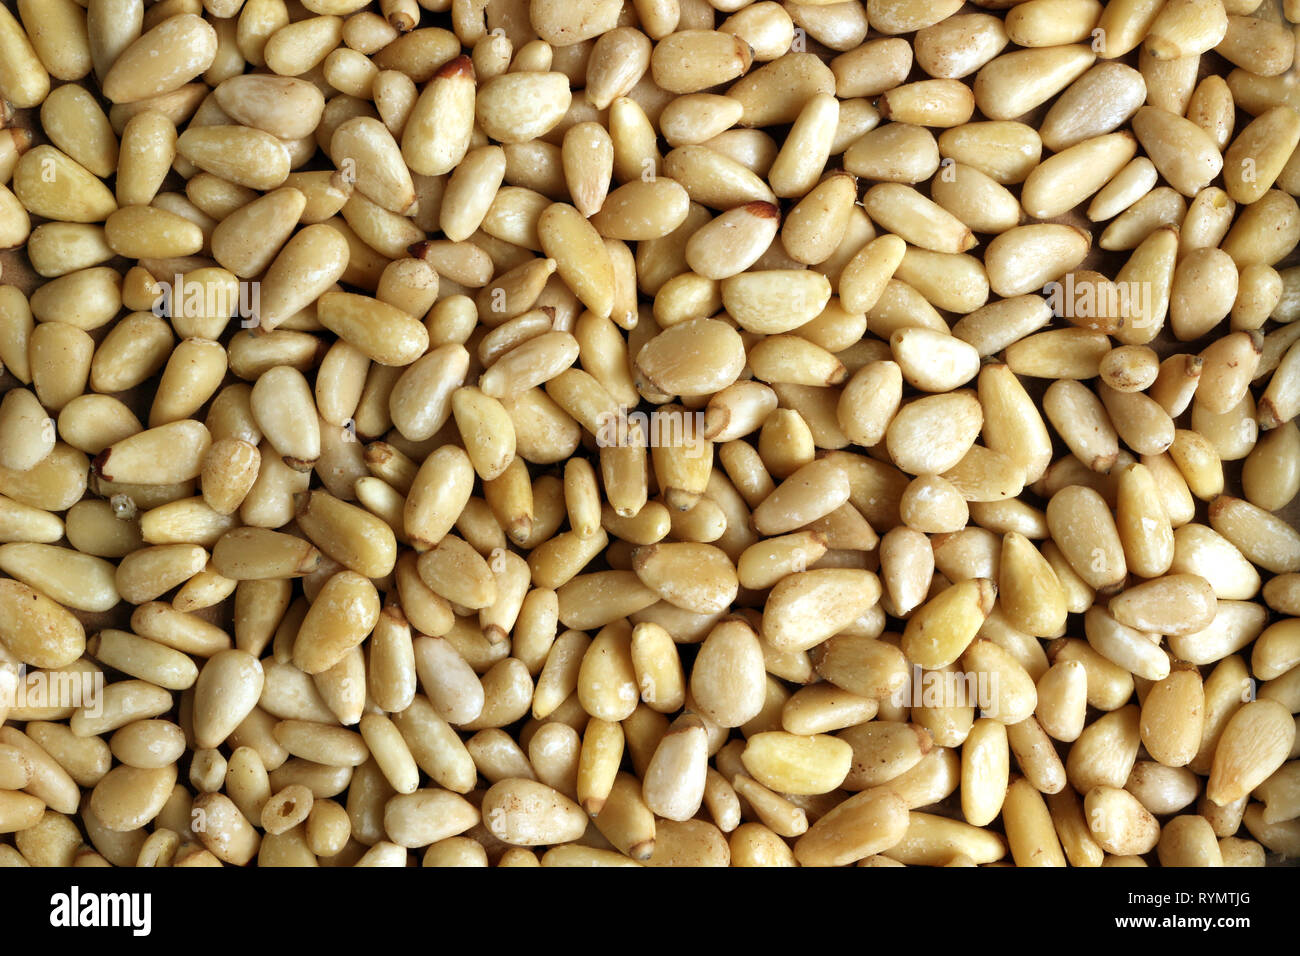 A close up of Pine nuts for background whole food texture Stock Photo